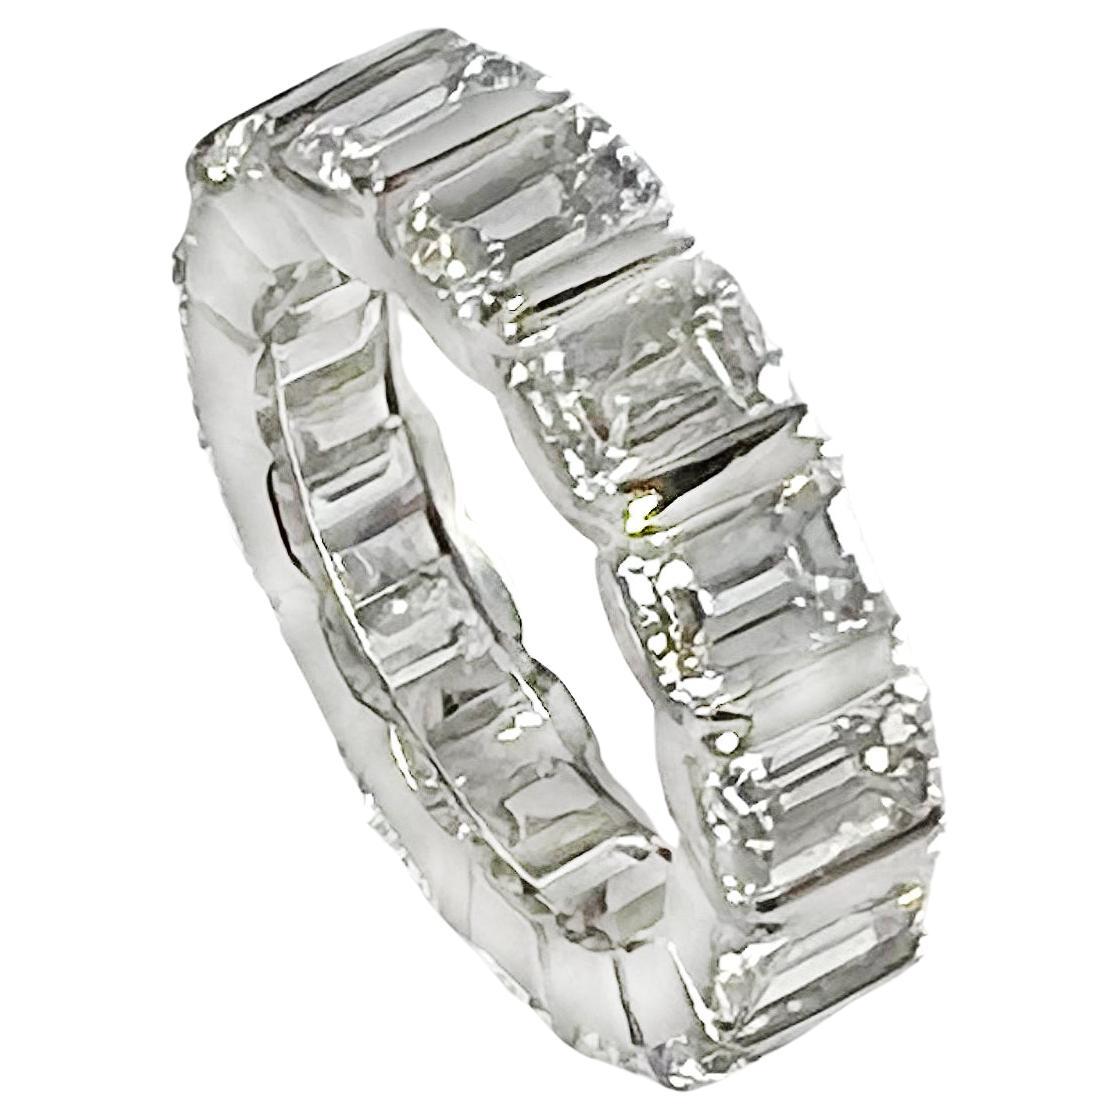 Platinum eternity band ring, showcasing fifteen emerald-cut natural diamonds weighing approximately 7.72 total carats.  The diamonds are all F-G color and VS1-VS2 clarity weighing approximately 0.50-0.51 carats each.  Polished channel-set platinum